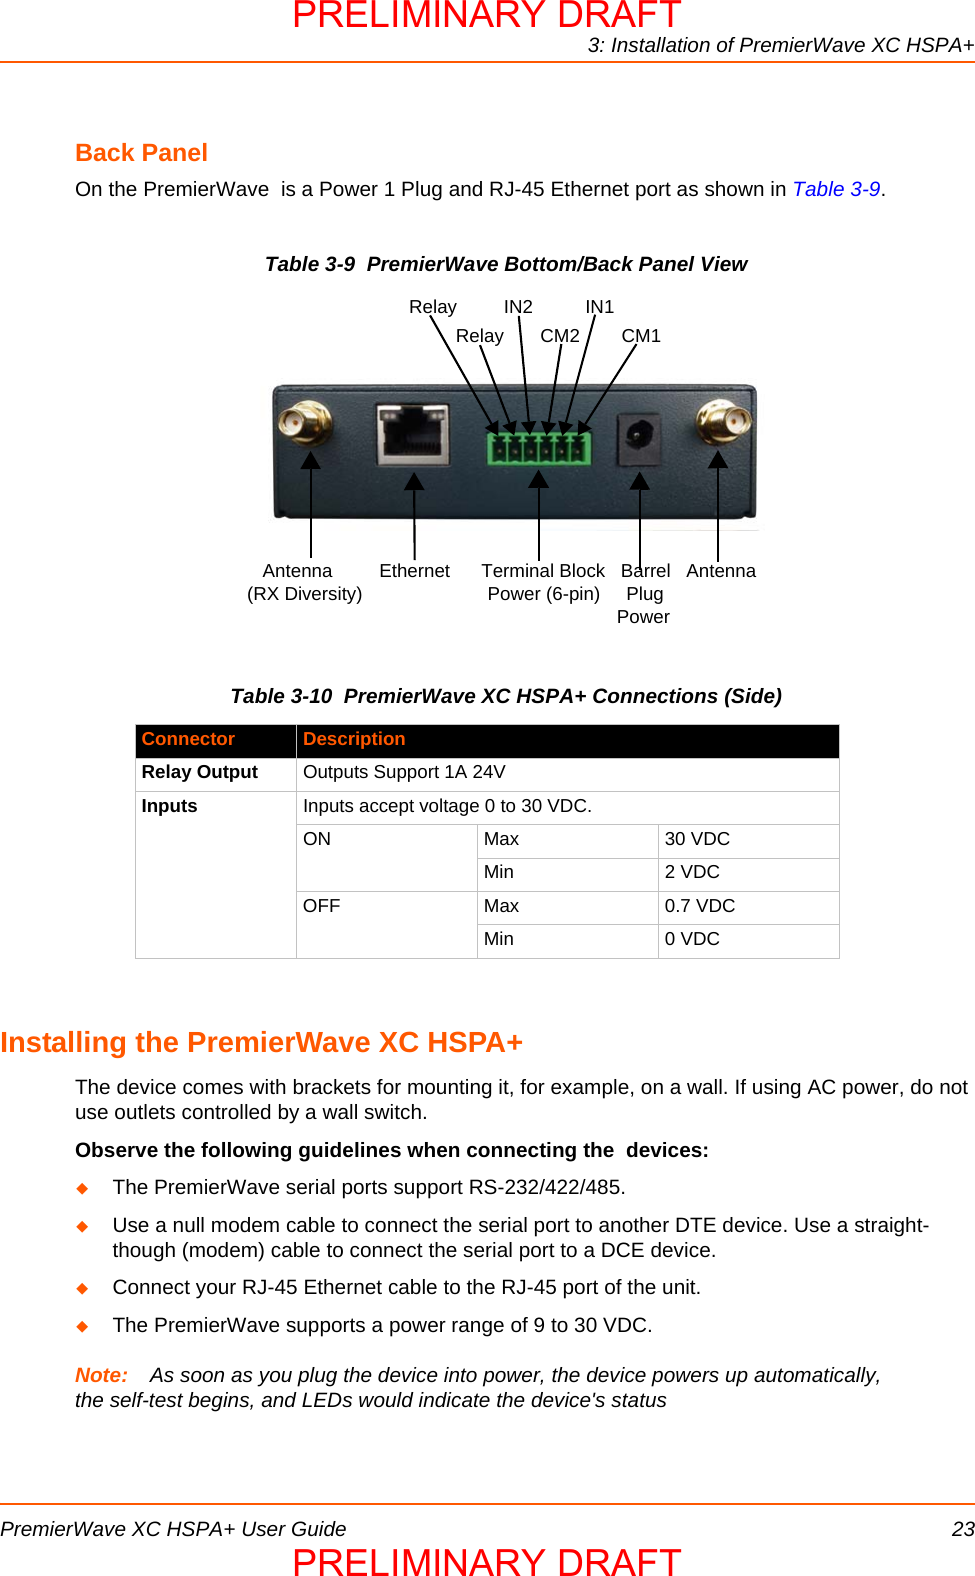 3: Installation of PremierWave XC HSPA+PremierWave XC HSPA+ User Guide 23Back PanelOn the PremierWave  is a Power 1 Plug and RJ-45 Ethernet port as shown in Table 3-9.  Table 3-9  PremierWave Bottom/Back Panel ViewTable 3-10  PremierWave XC HSPA+ Connections (Side)Installing the PremierWave XC HSPA+The device comes with brackets for mounting it, for example, on a wall. If using AC power, do not use outlets controlled by a wall switch.Observe the following guidelines when connecting the  devices:The PremierWave serial ports support RS-232/422/485.Use a null modem cable to connect the serial port to another DTE device. Use a straight-though (modem) cable to connect the serial port to a DCE device.Connect your RJ-45 Ethernet cable to the RJ-45 port of the unit.The PremierWave supports a power range of 9 to 30 VDC. Note: As soon as you plug the device into power, the device powers up automatically, the self-test begins, and LEDs would indicate the device&apos;s statusConnector DescriptionRelay Output Outputs Support 1A 24VInputs Inputs accept voltage 0 to 30 VDC.ON Max 30 VDCMin 2 VDCOFF Max 0.7 VDCMin 0 VDC   Antenna         Ethernet      Terminal Block   Barrel   Antenna(RX Diversity)                        Power (6-pin)     Plug                                                                       PowerRelay         IN2          IN1         Relay       CM2        CM1PRELIMINARY DRAFTPRELIMINARY DRAFT